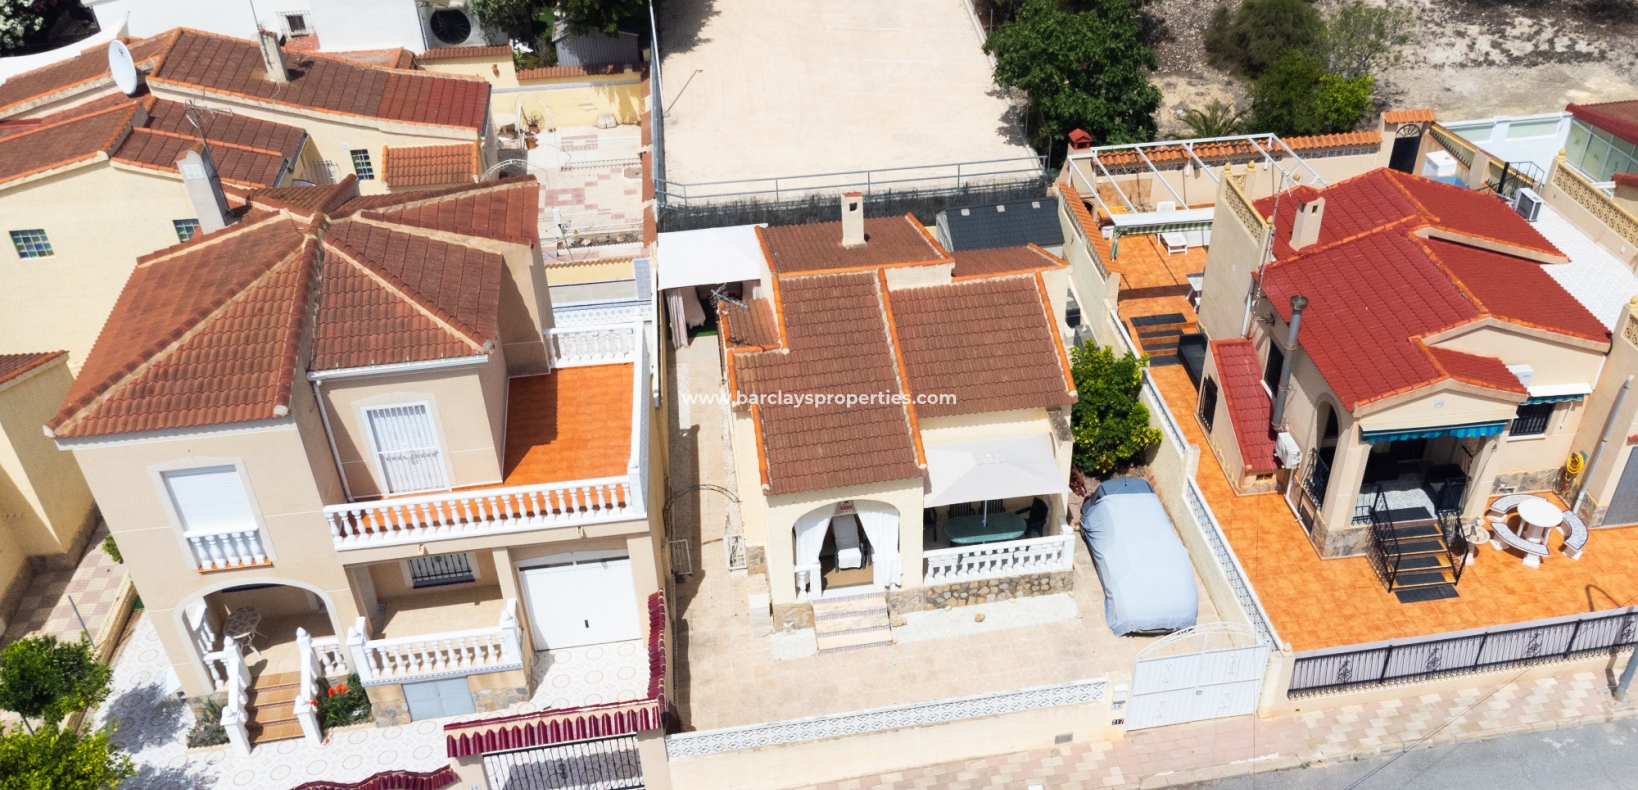 Detached house for sale in Alicante